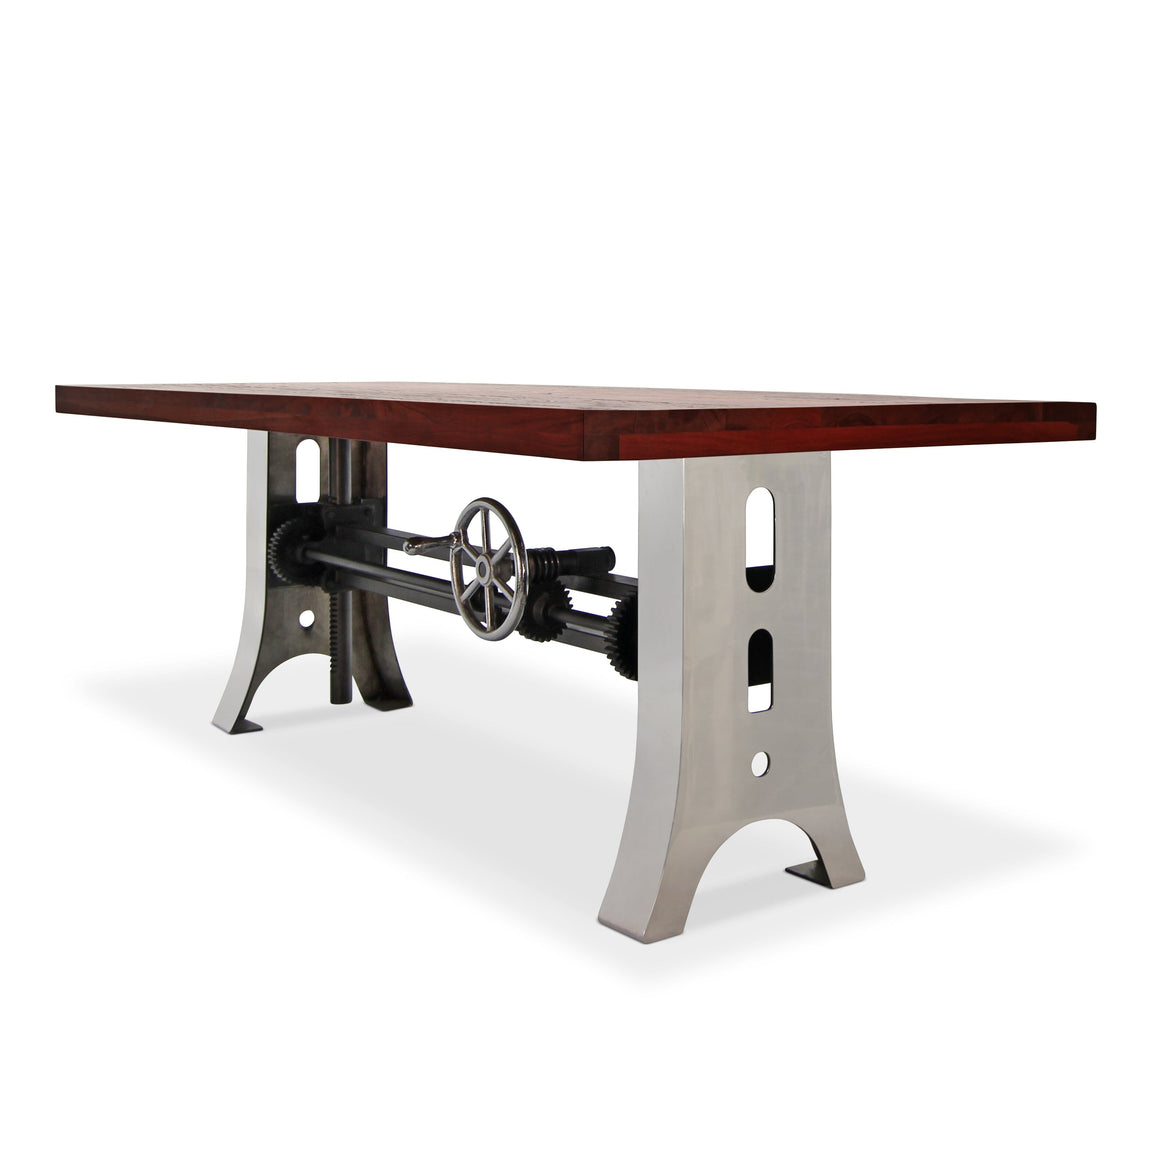 Industrial Dining Table Stainless Steel Adjustable Height Rustic Mahogany Dining Table Rustic Deco